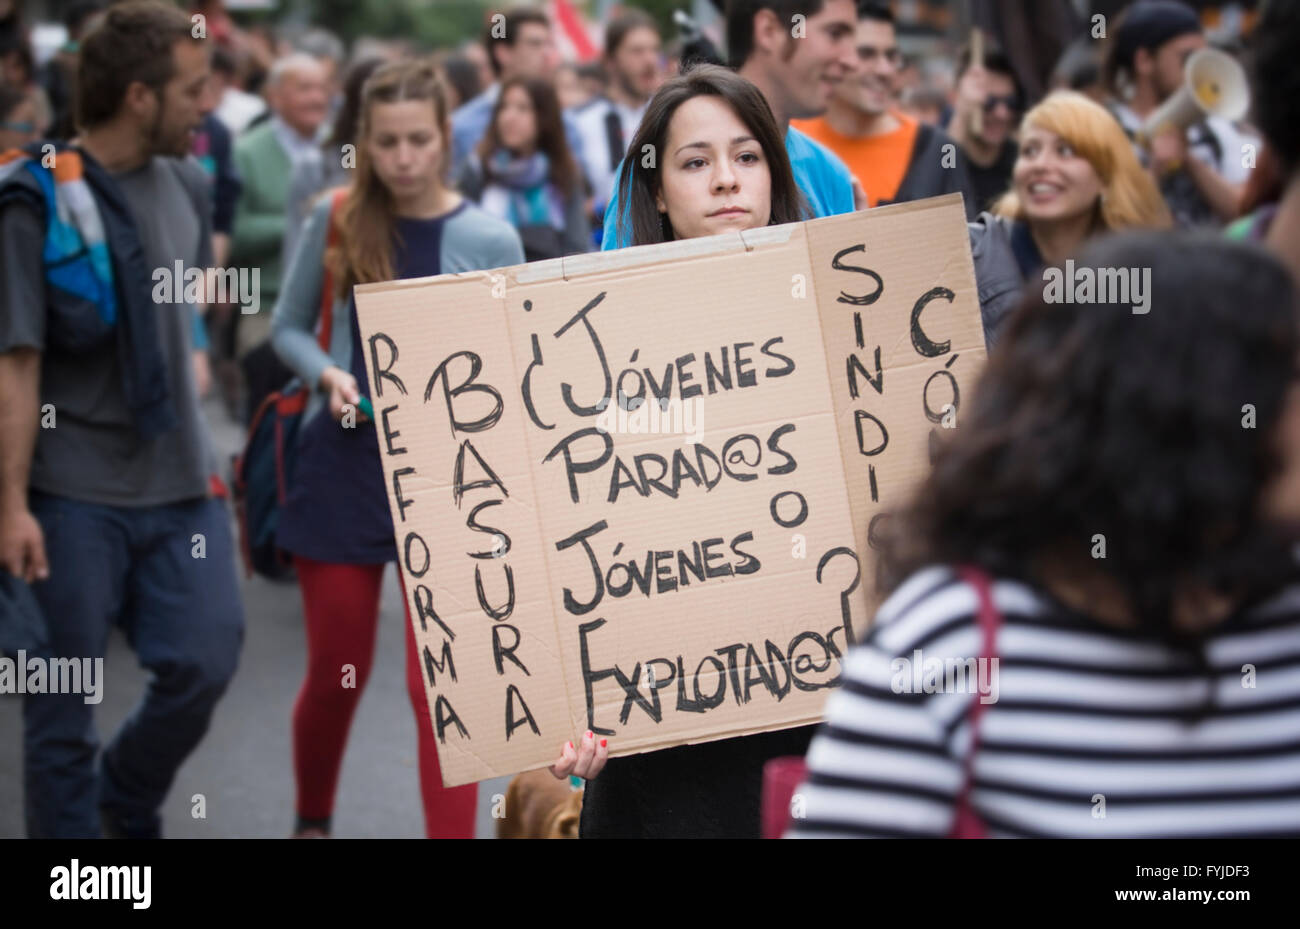 Badajoz, Spain - March 29, 2012: young girl demonstrator with cardboard banner protesting against austerity cuts Stock Photo